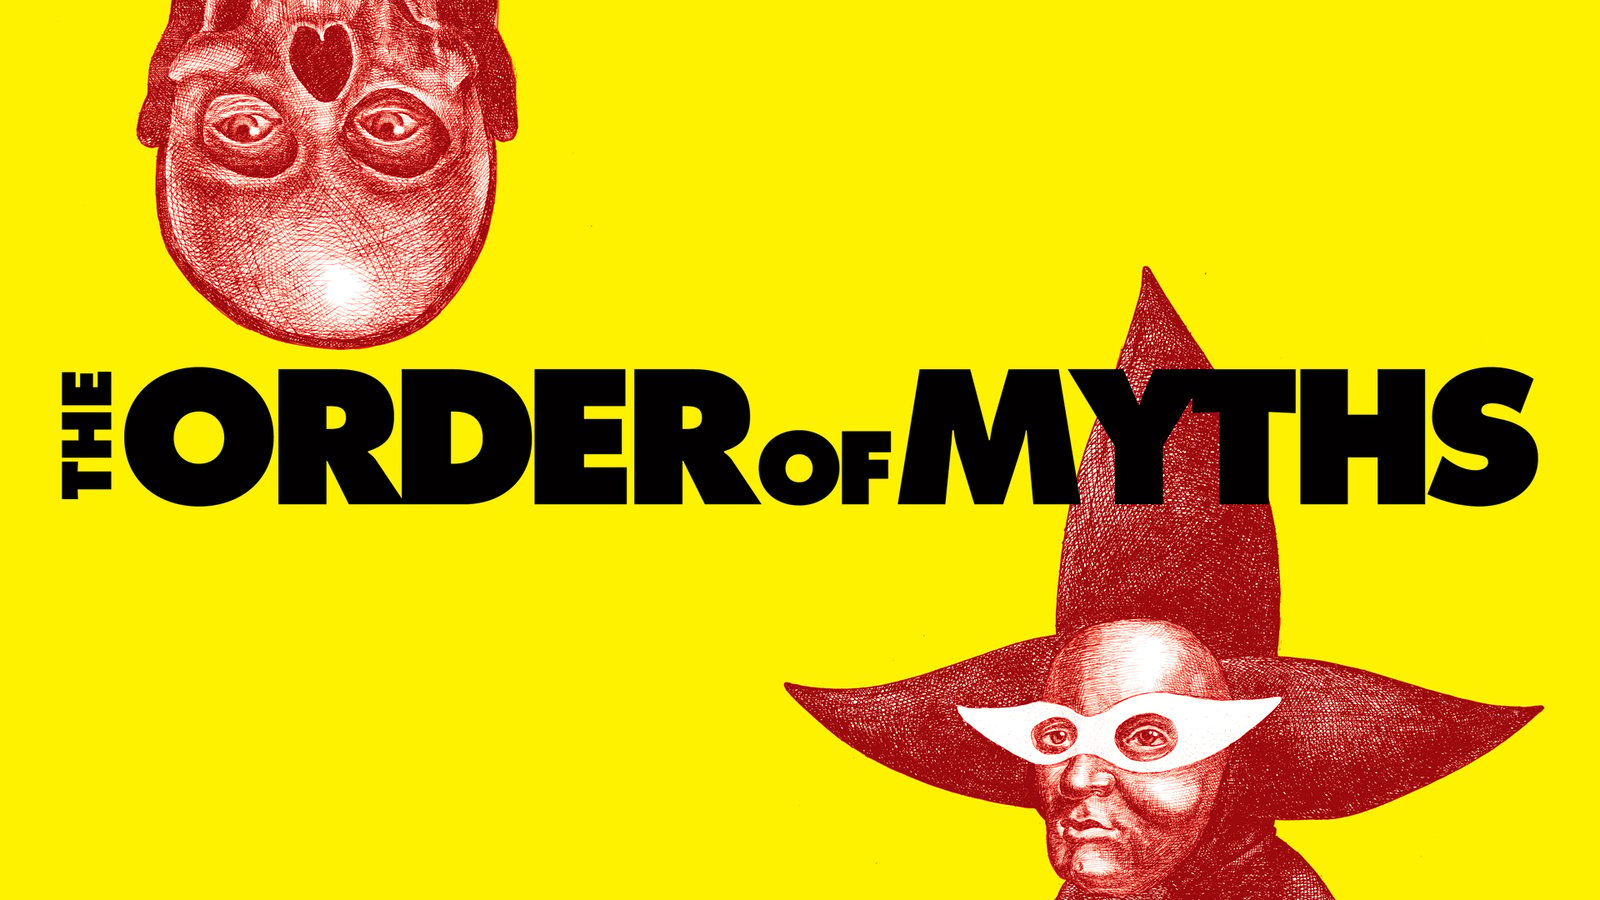 The Order of Myths - Racism in Mardi Gras Celebrations